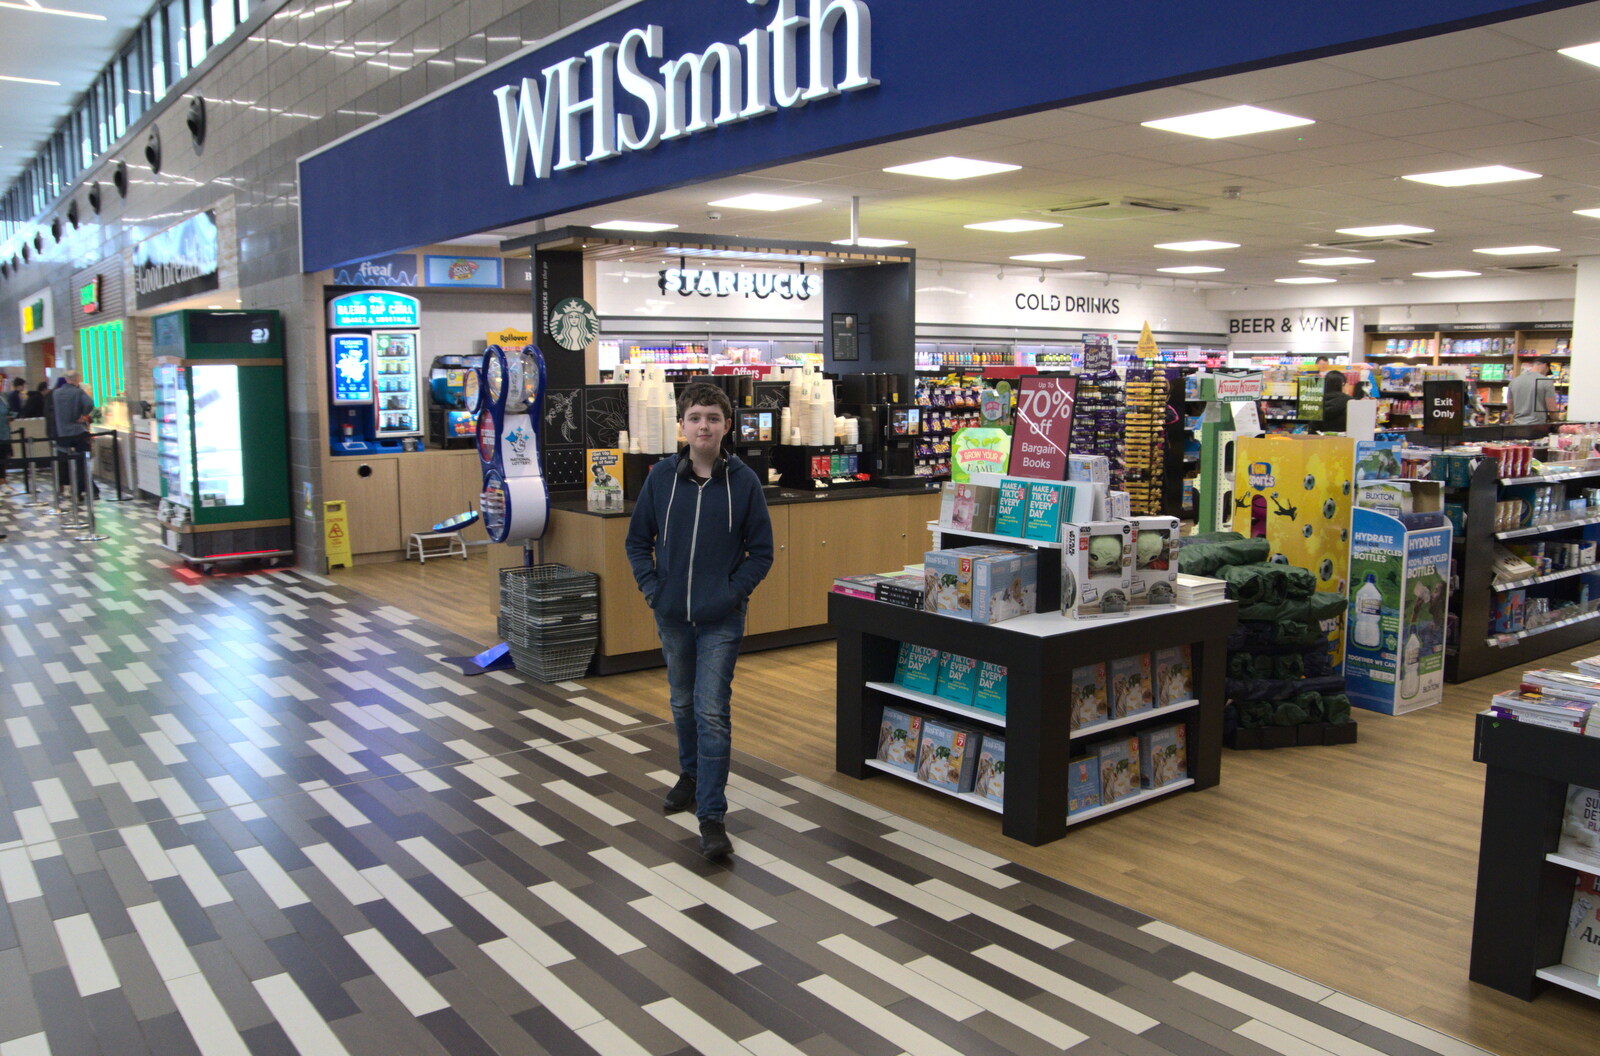 Fred lurks outside WHSmith from Chilli Farms, Okehampton and the Oxenham Arms, South Zeal, Devon - 10th April 2023